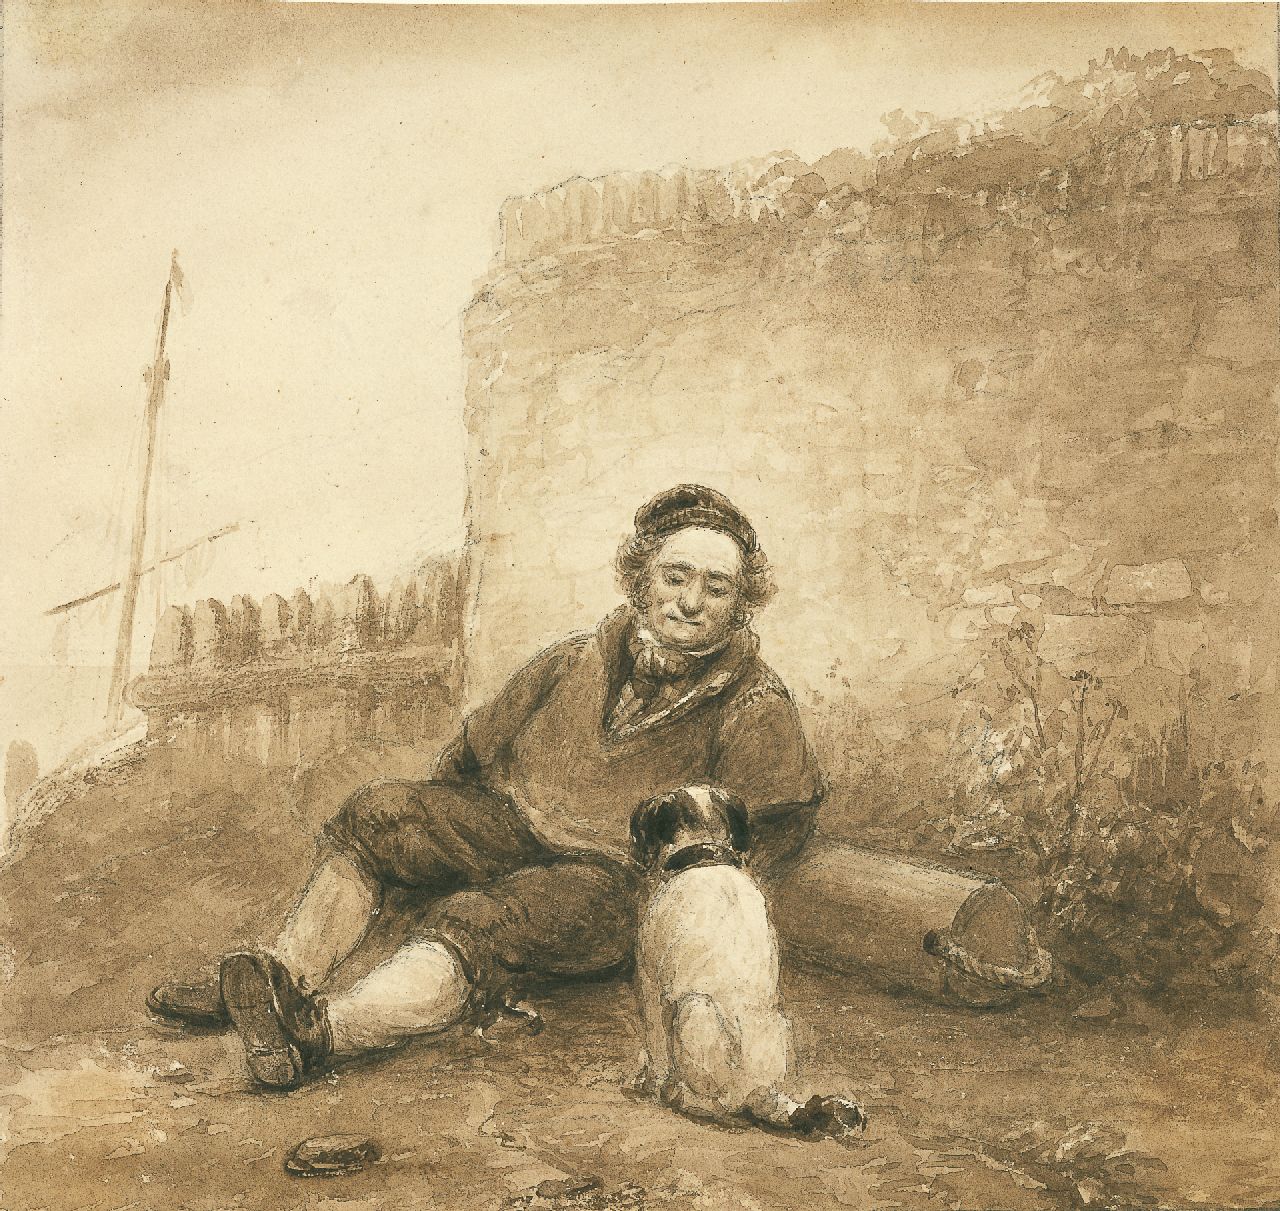 Schelfhout A.  | Andreas Schelfhout, Fisherman with his dog, sepia on paper 19.4 x 21.0 cm, signed on the reverse